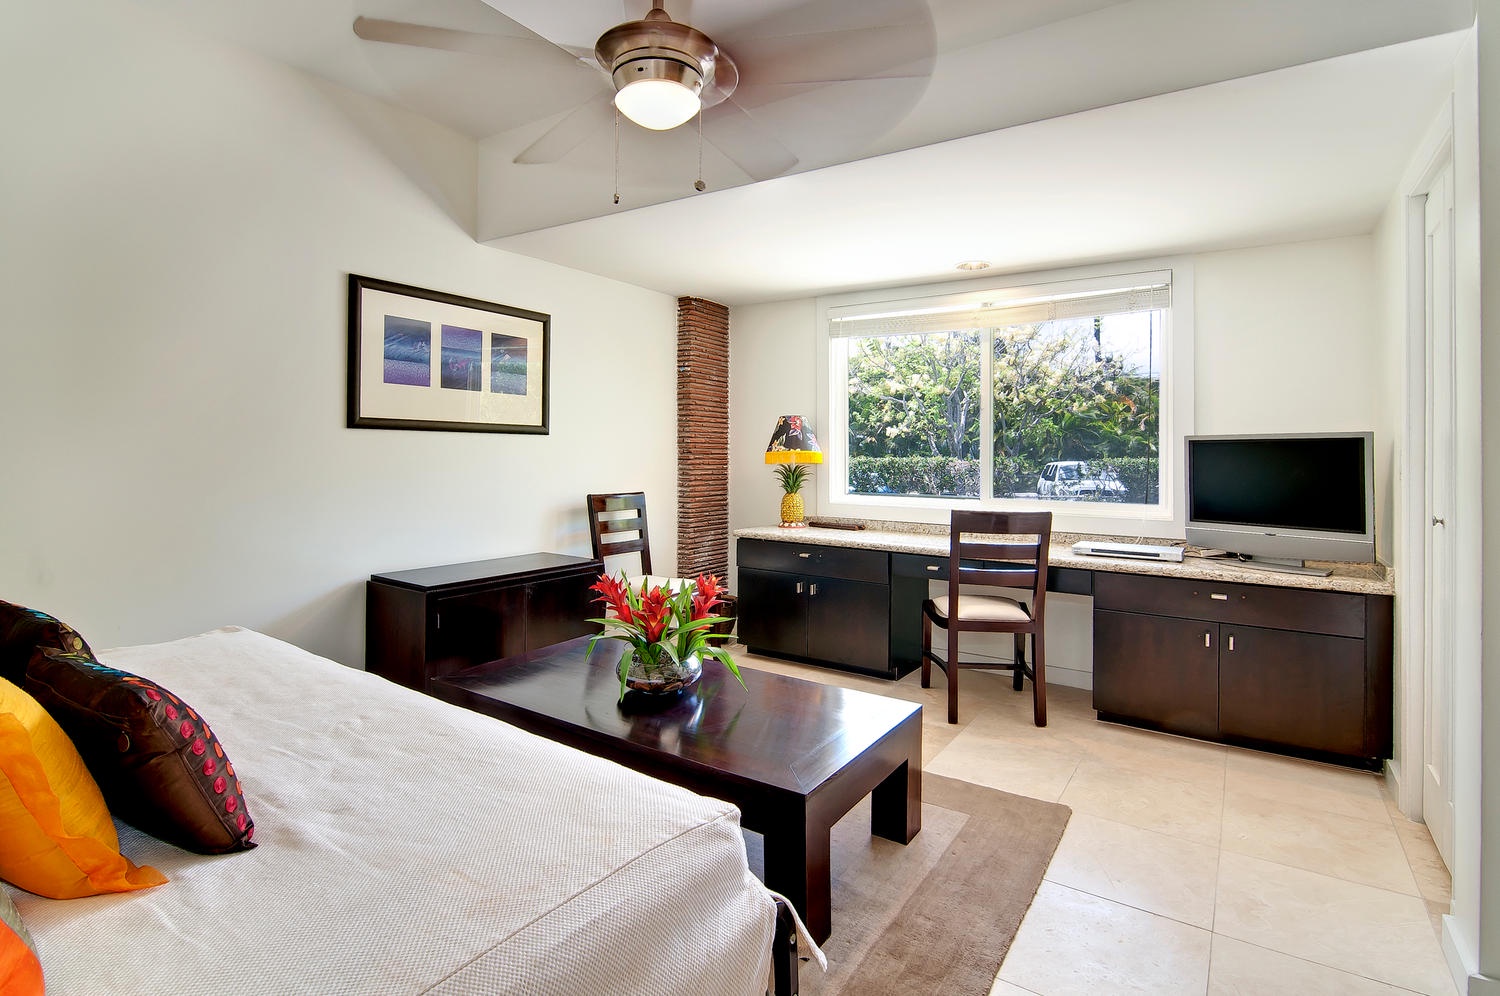 Honolulu Vacation Rentals, Kahala Lani - Room Four - Twin bed has been repalced with aKing bed, room sleeps two